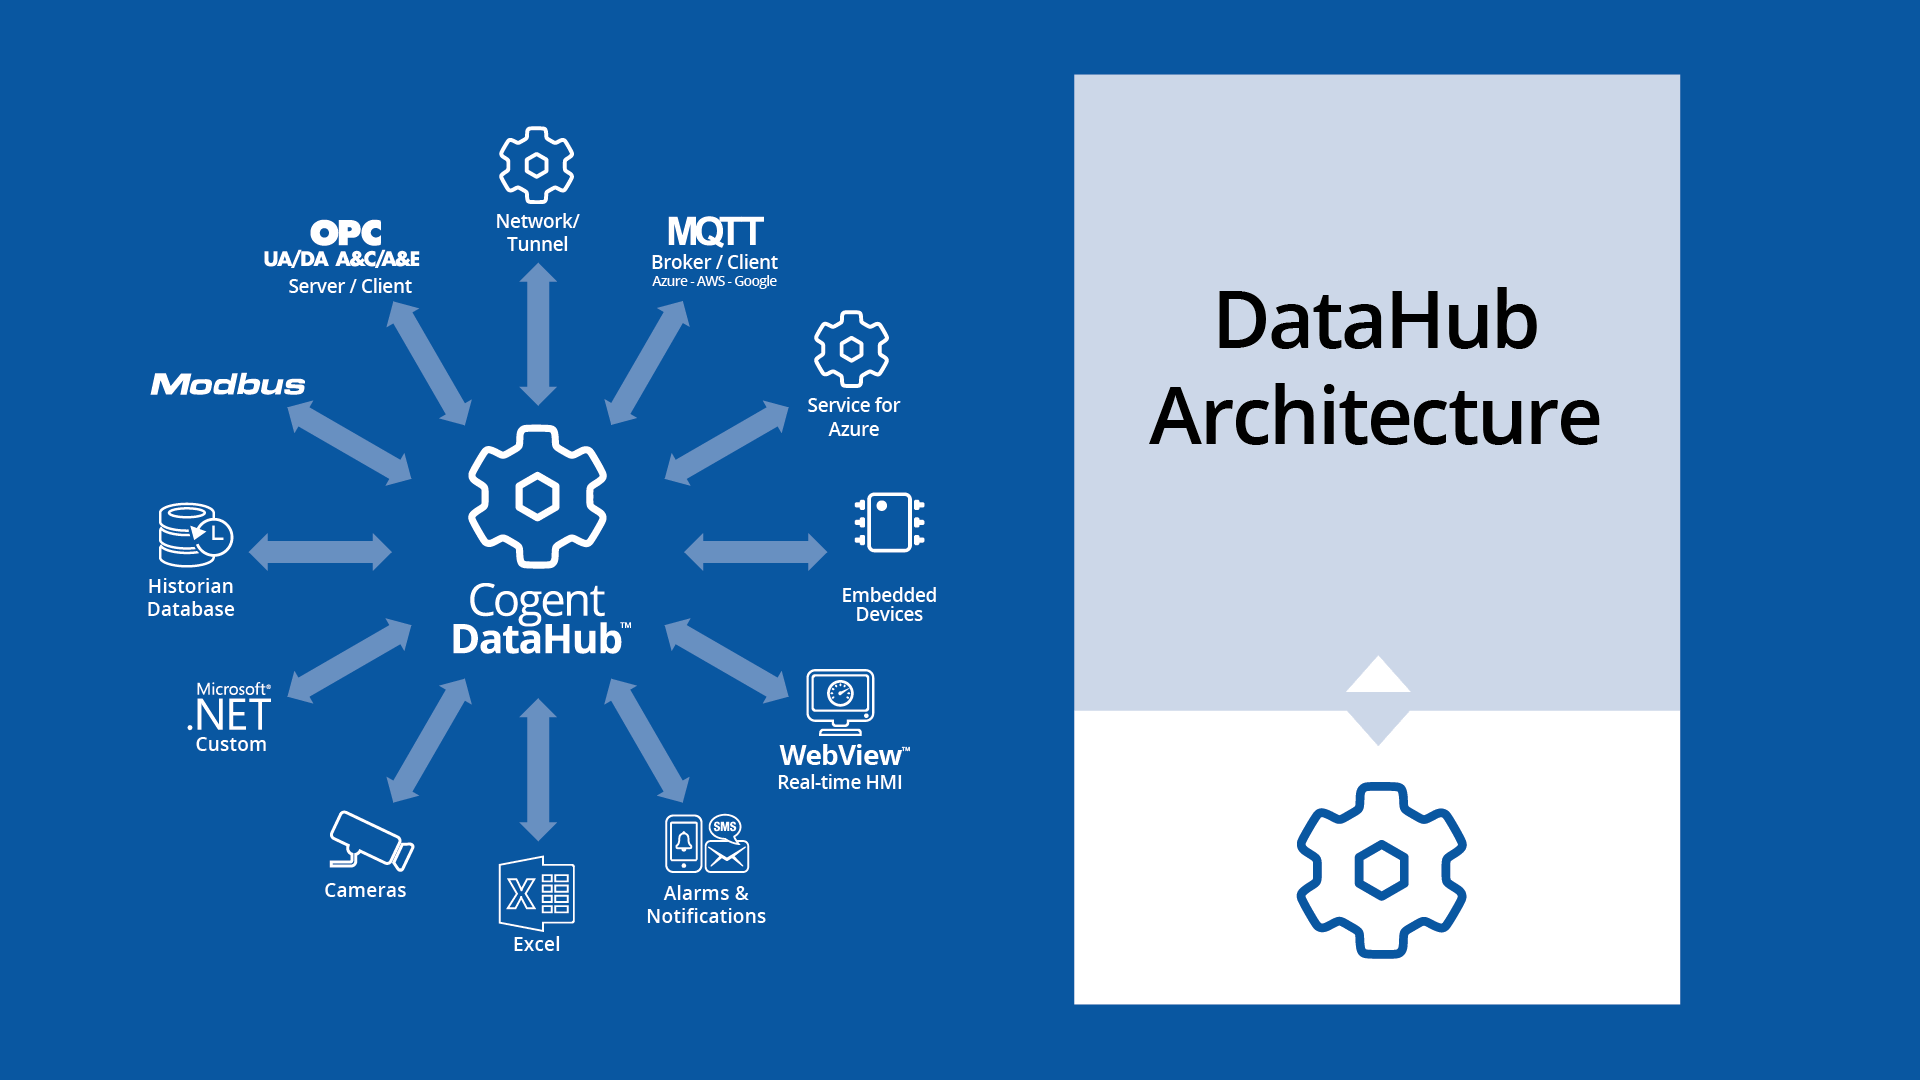 Datahub Architecture connections